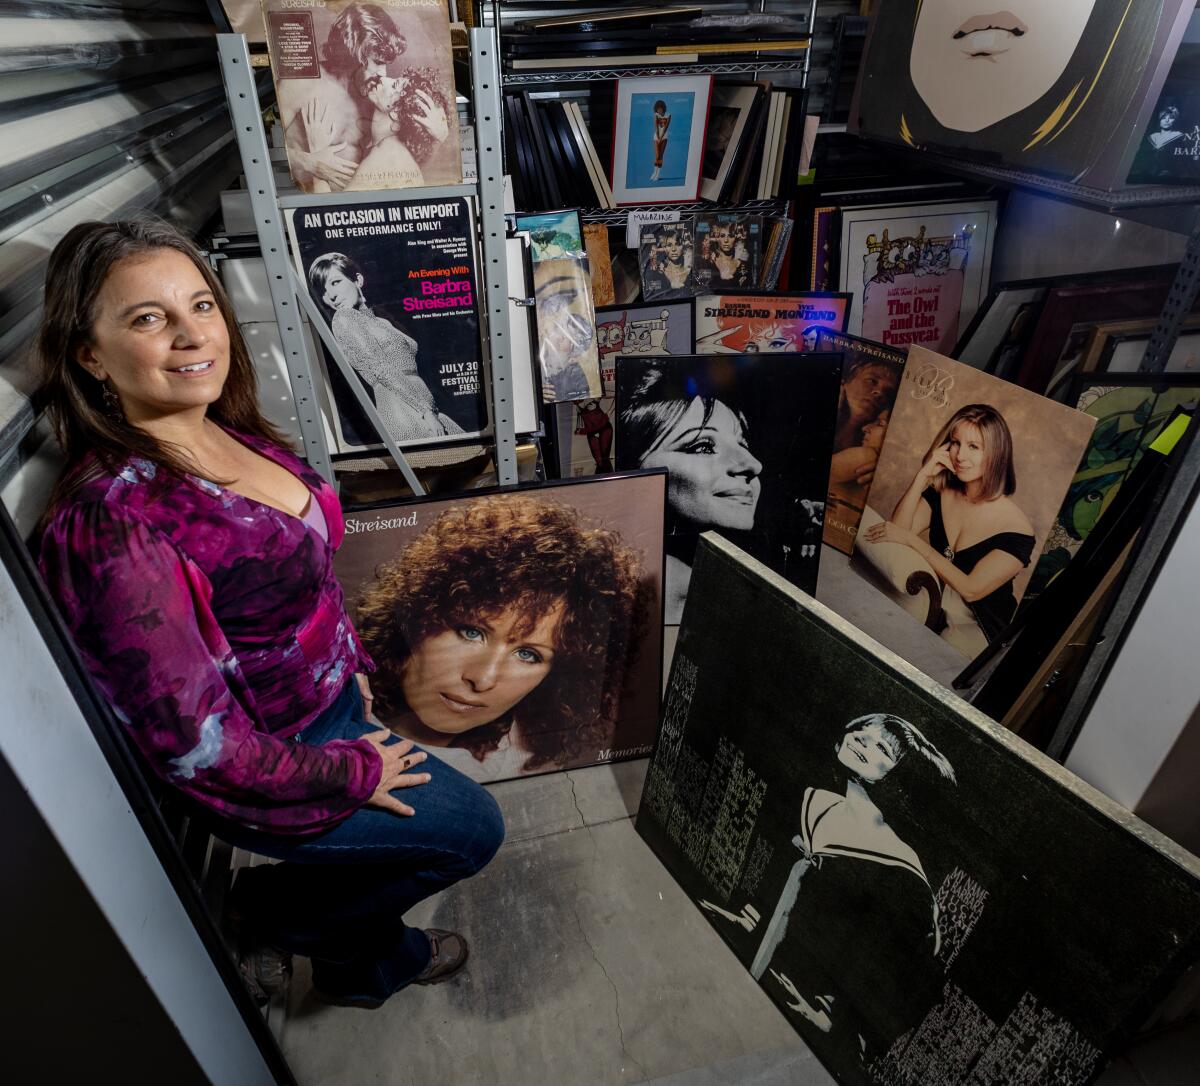 Mara Papalas stands amidst Barbra Streisand pictures and albums in a storage container.